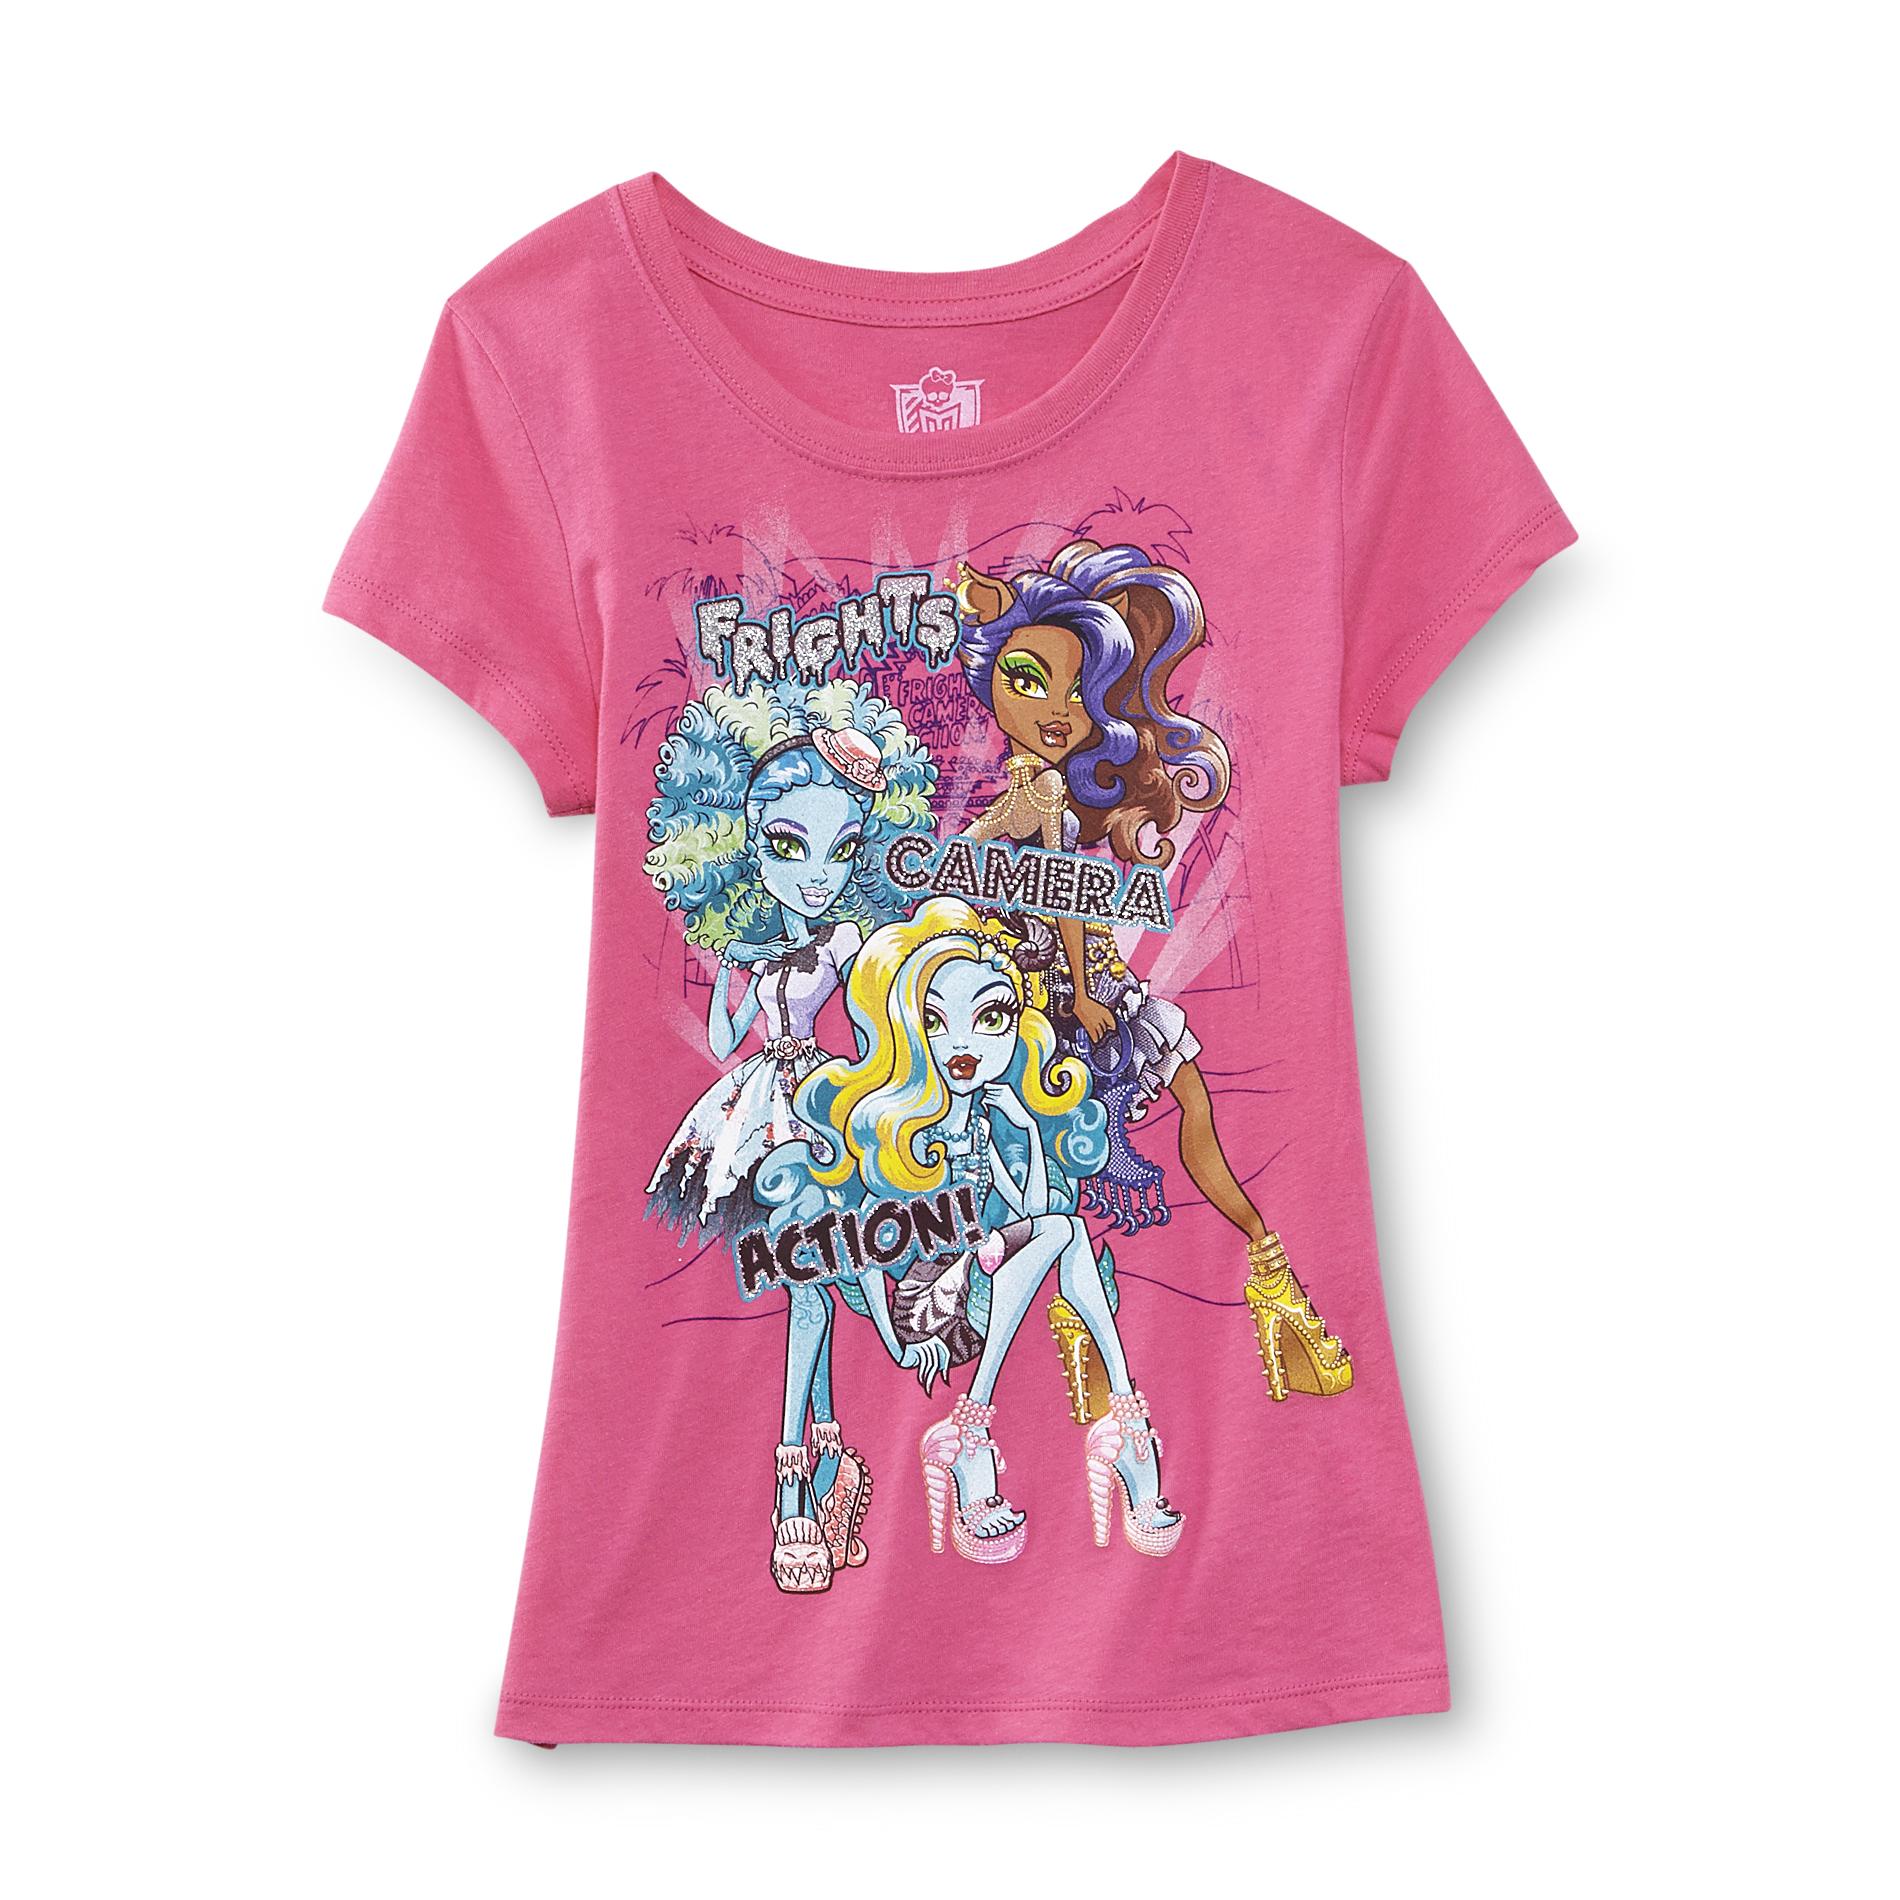 Monster High Girl's Graphic T-Shirt - Frights  Camera